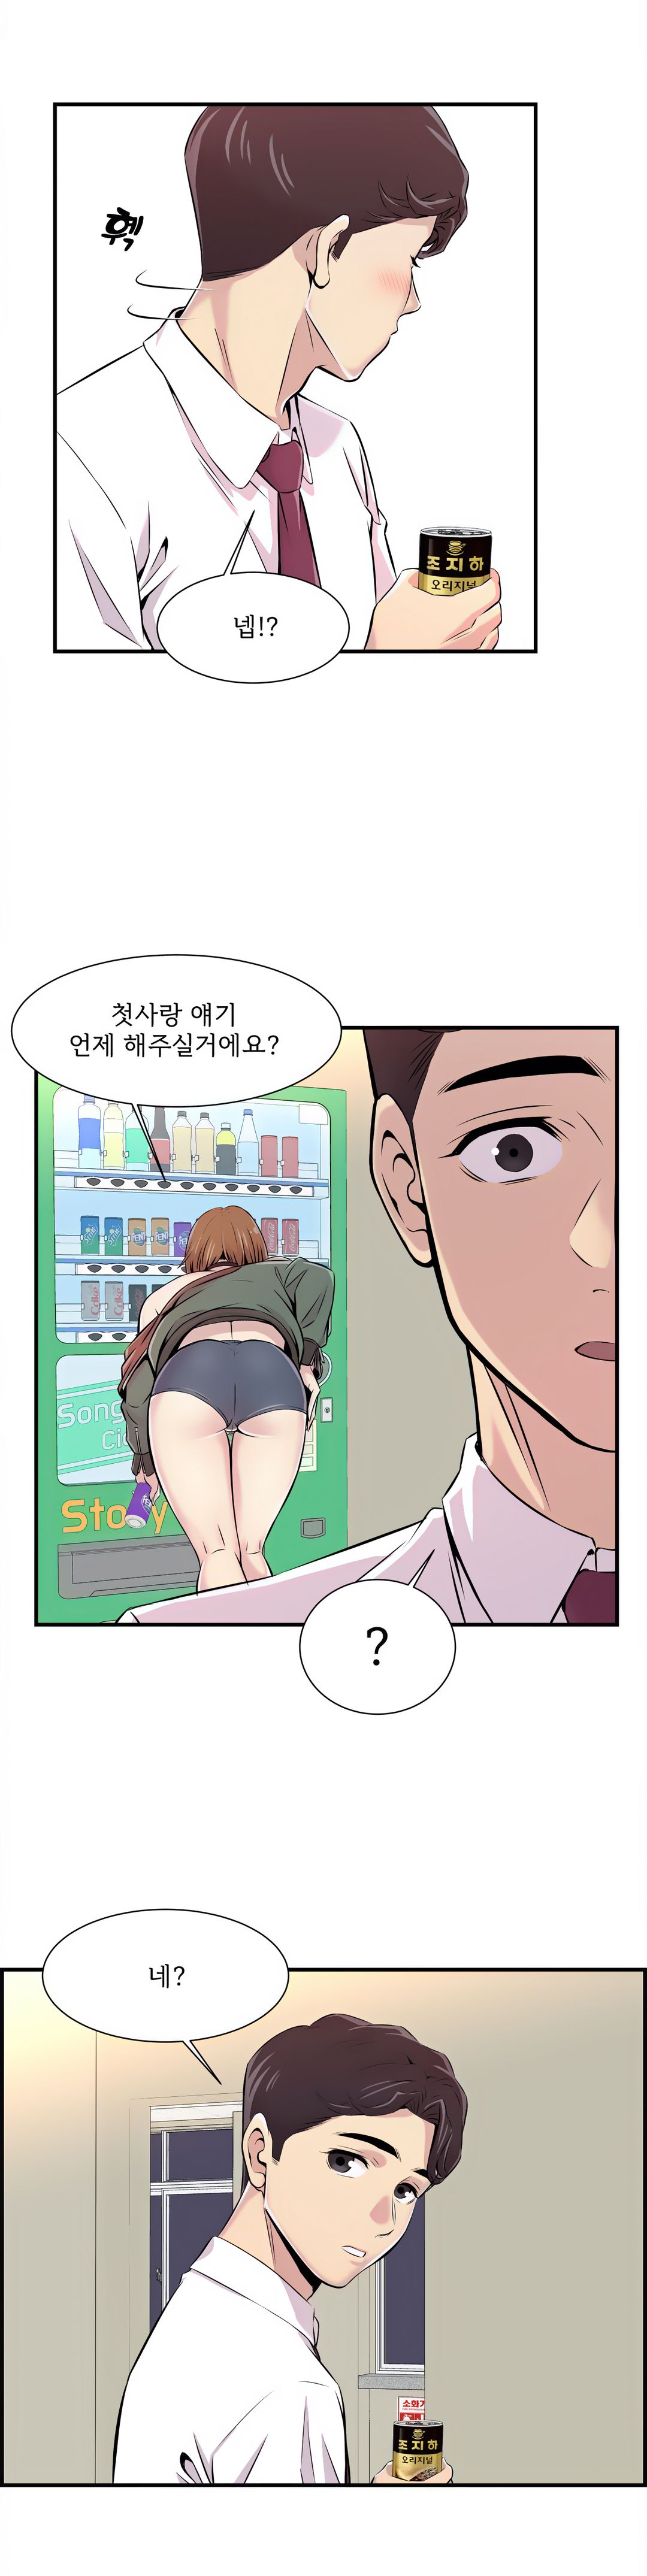 Cram School Scandal Raw - Chapter 2 Page 25